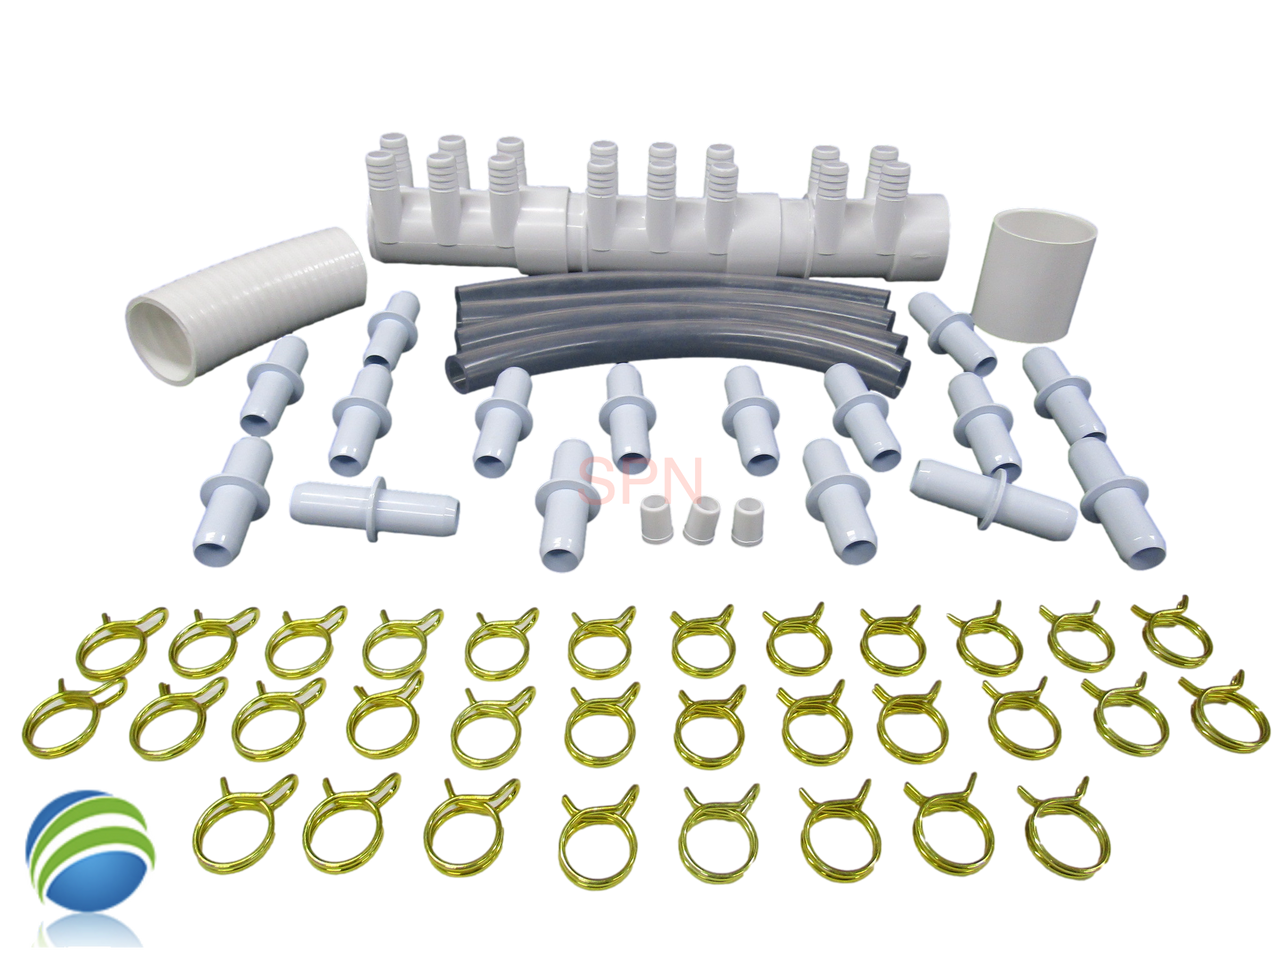 Manifold Hot Tub Spa Dead End (16) 3/4" Outlets Glue and Coupler Kit Video How To